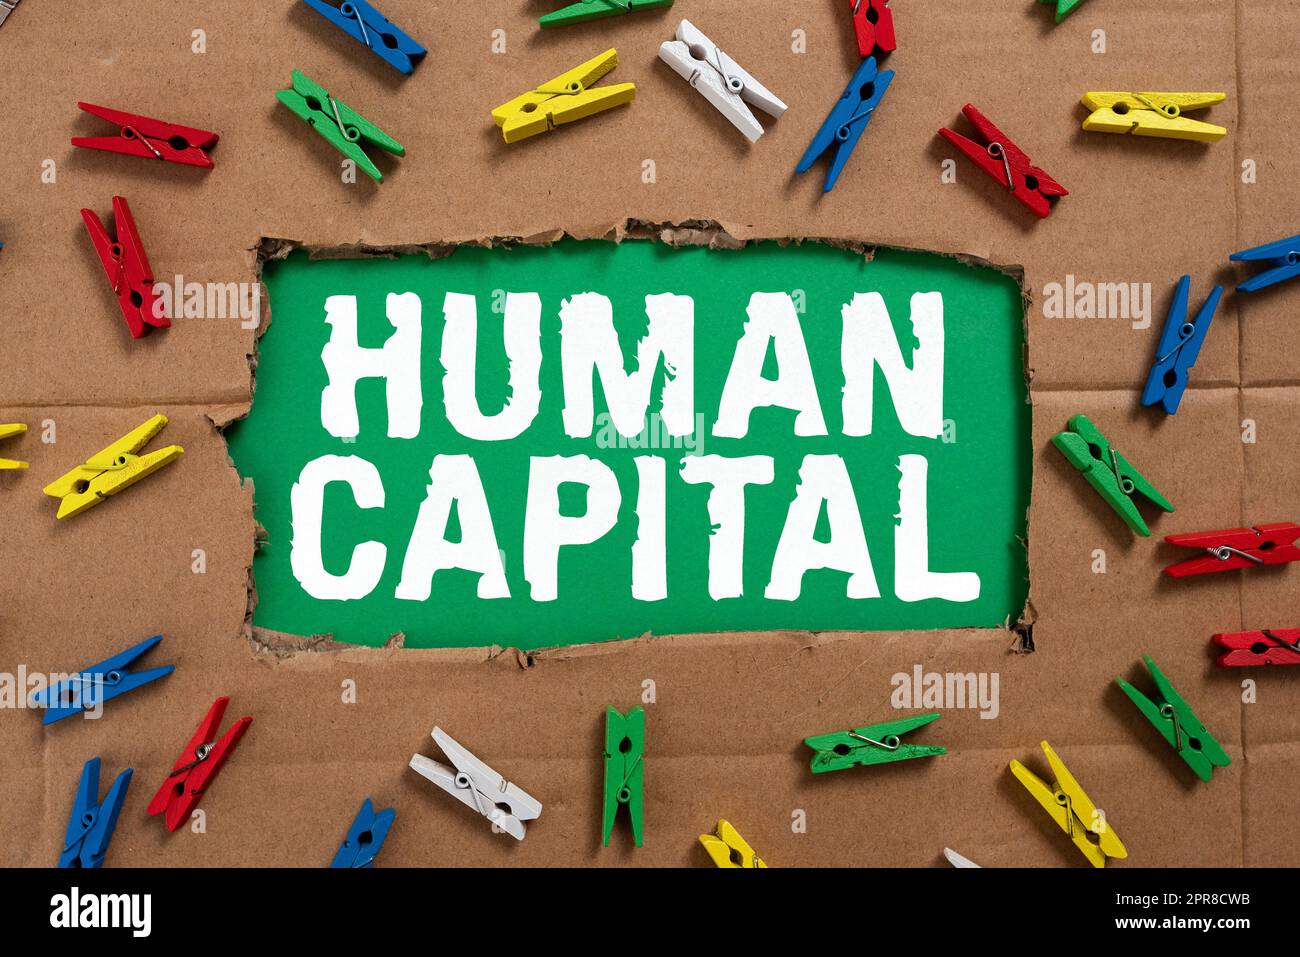 Inspiration showing sign Human Capital. Business approach Intangible Collective Resources Competence Capital Education Important Ideas Written Under Ripped Cardboard With Colored Pegs Around. Stock Photo